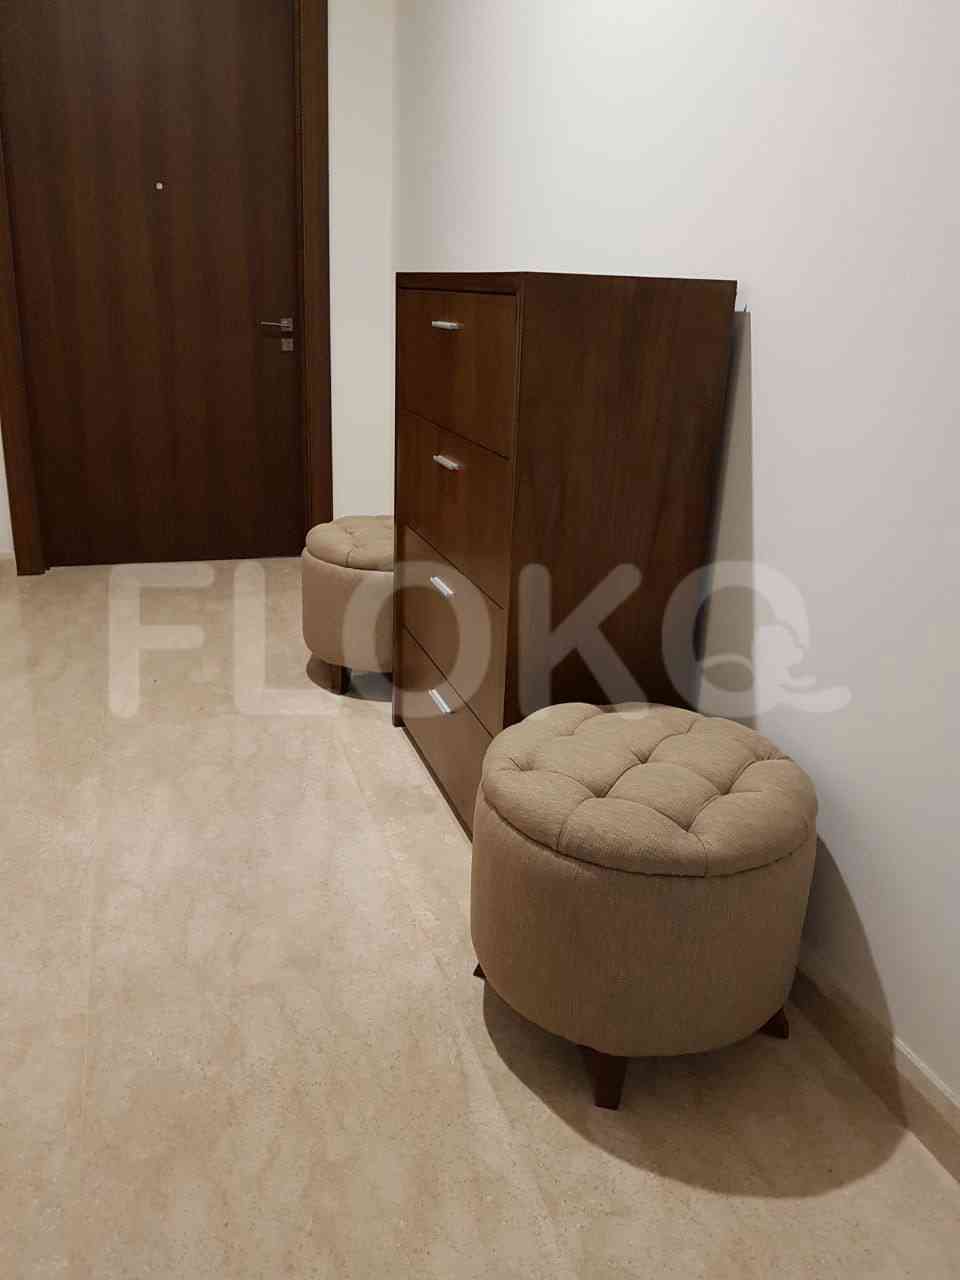 2 Bedroom on 18th Floor for Rent in Pakubuwono Spring Apartment - fga4a1 10